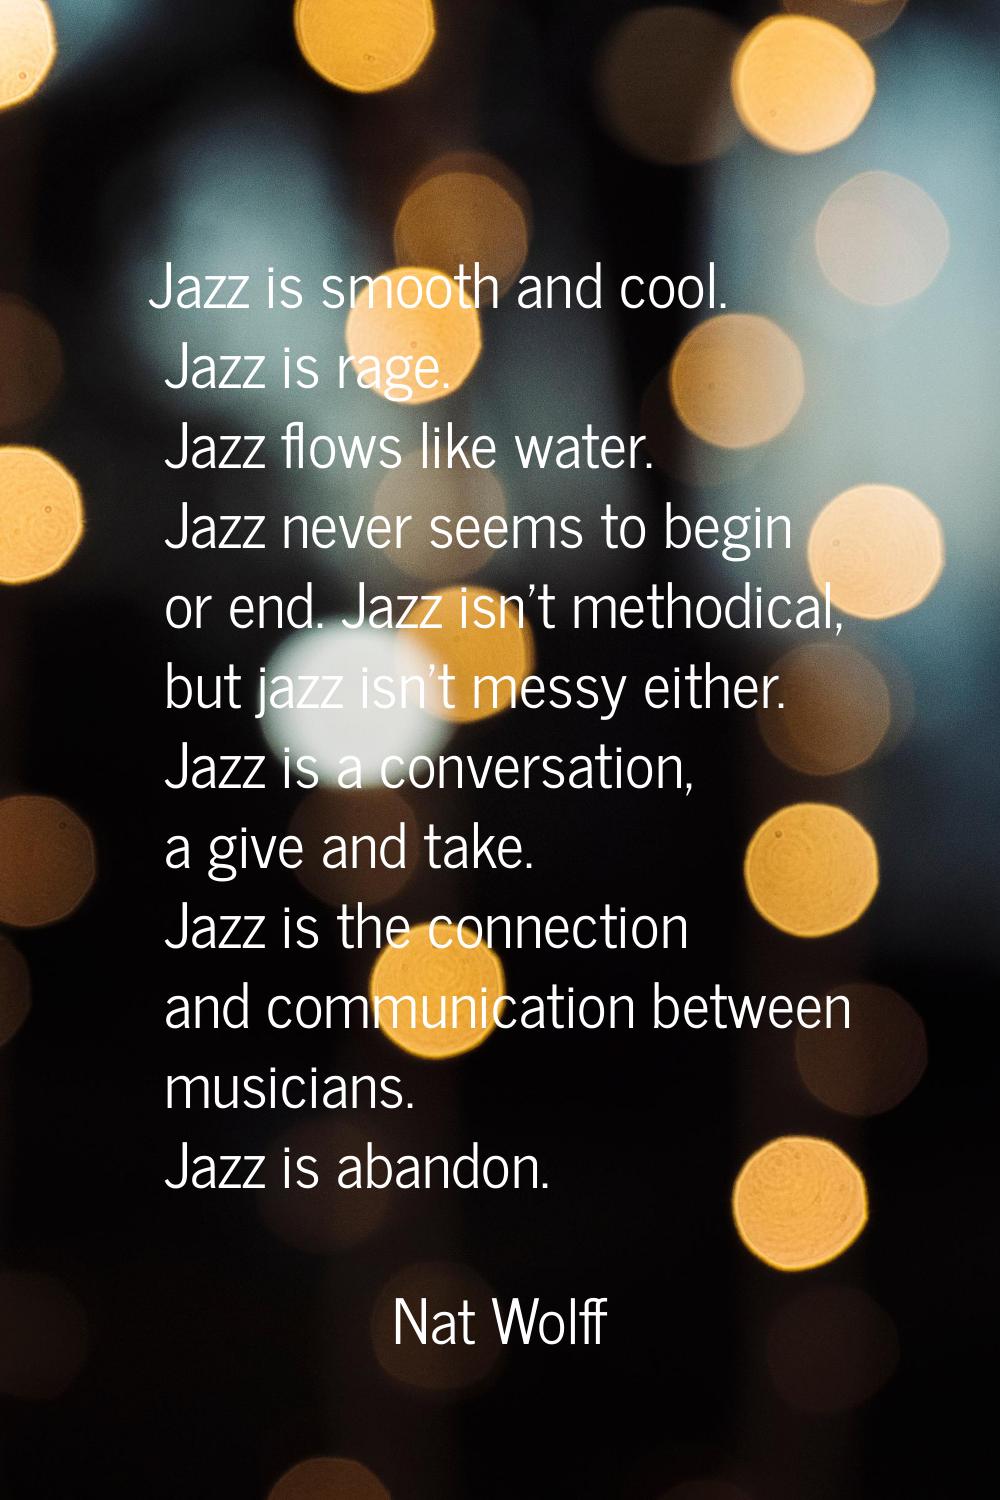 Jazz is smooth and cool. Jazz is rage. Jazz flows like water. Jazz never seems to begin or end. Jaz